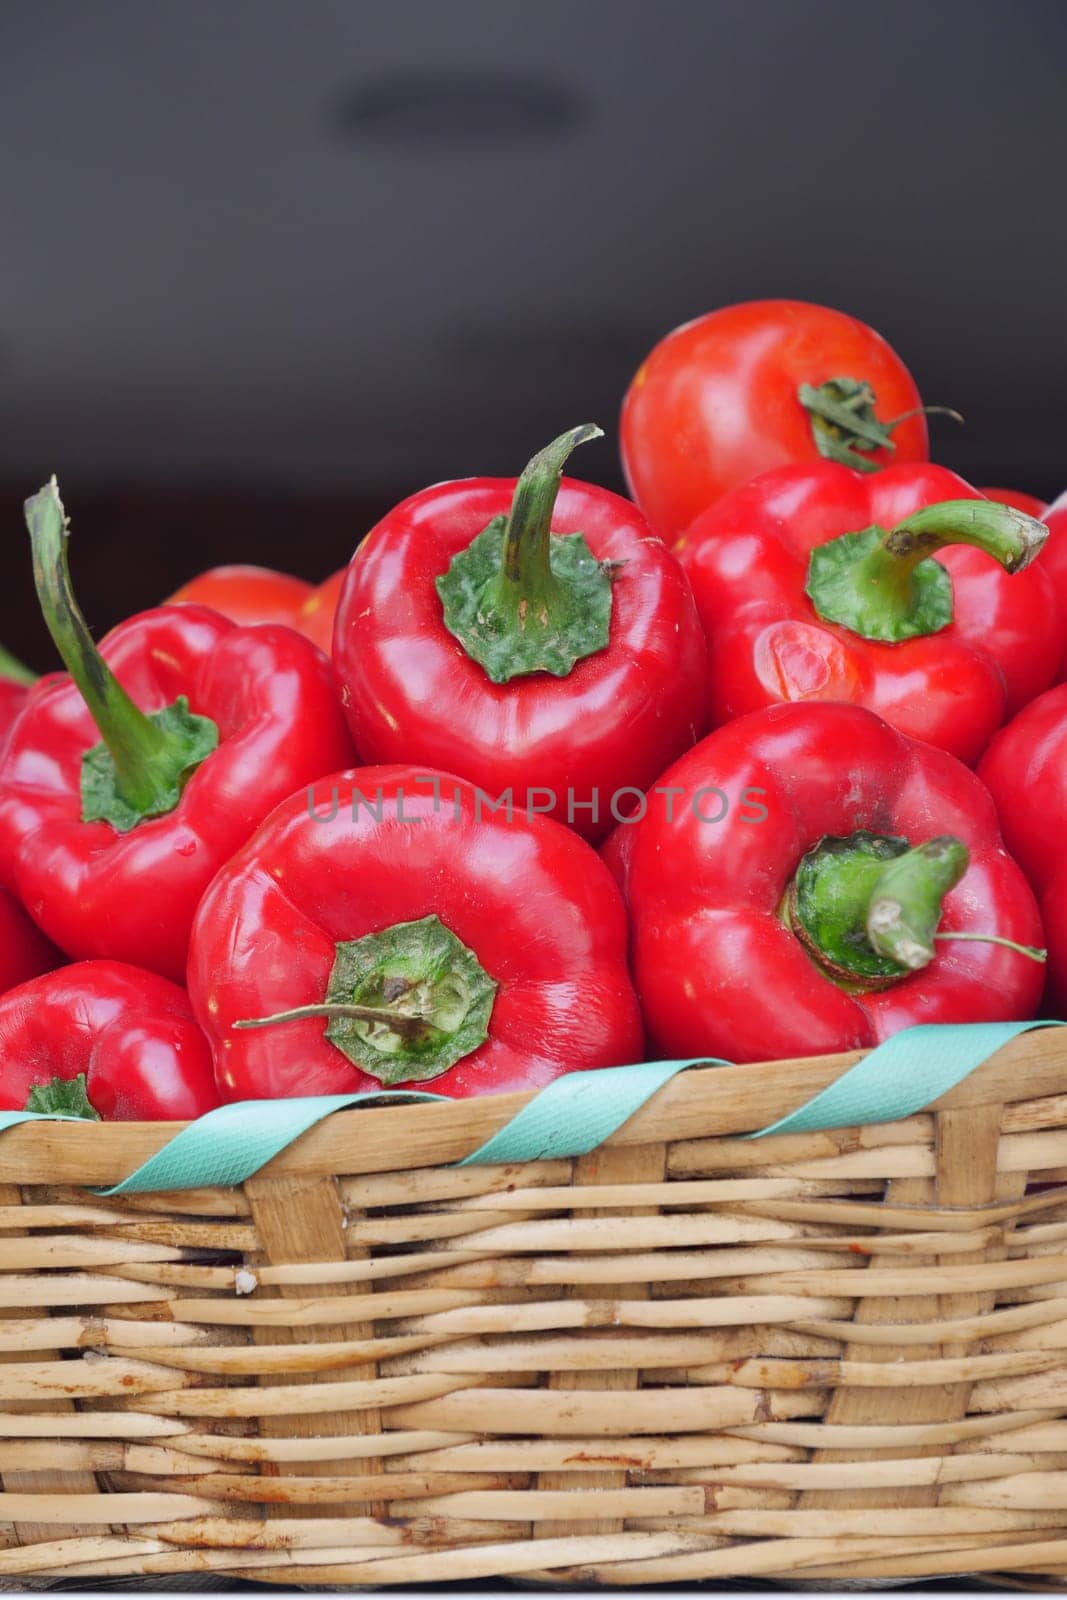 Wicker basket holds red bell peppers .